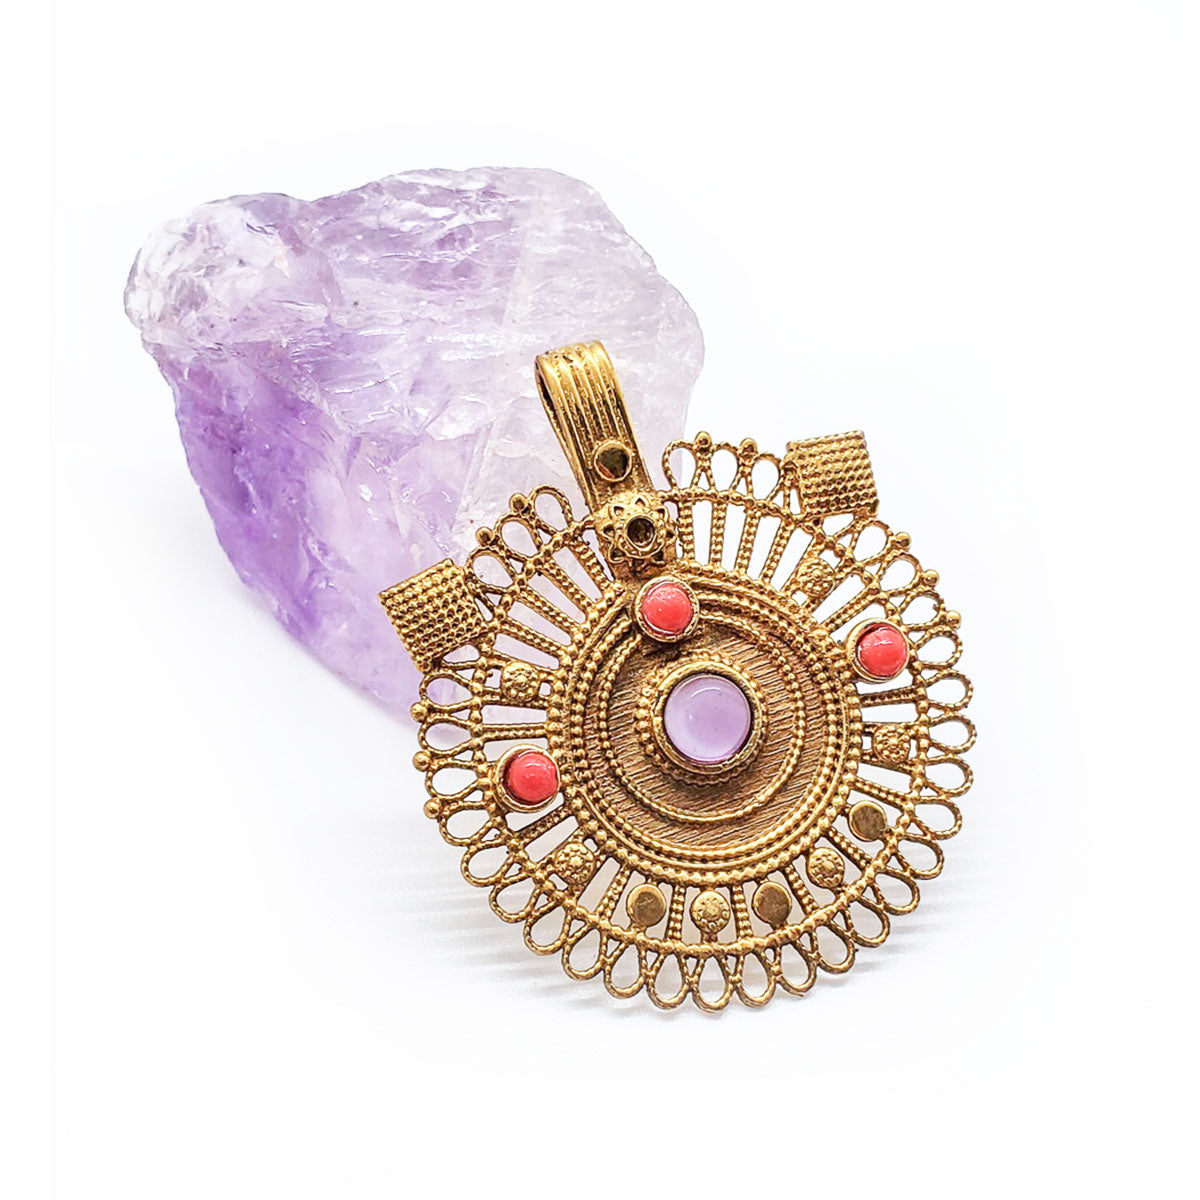 Recycled Brass Bejeweled Statement Pendant - Red Coral & Amethyst Gemstone